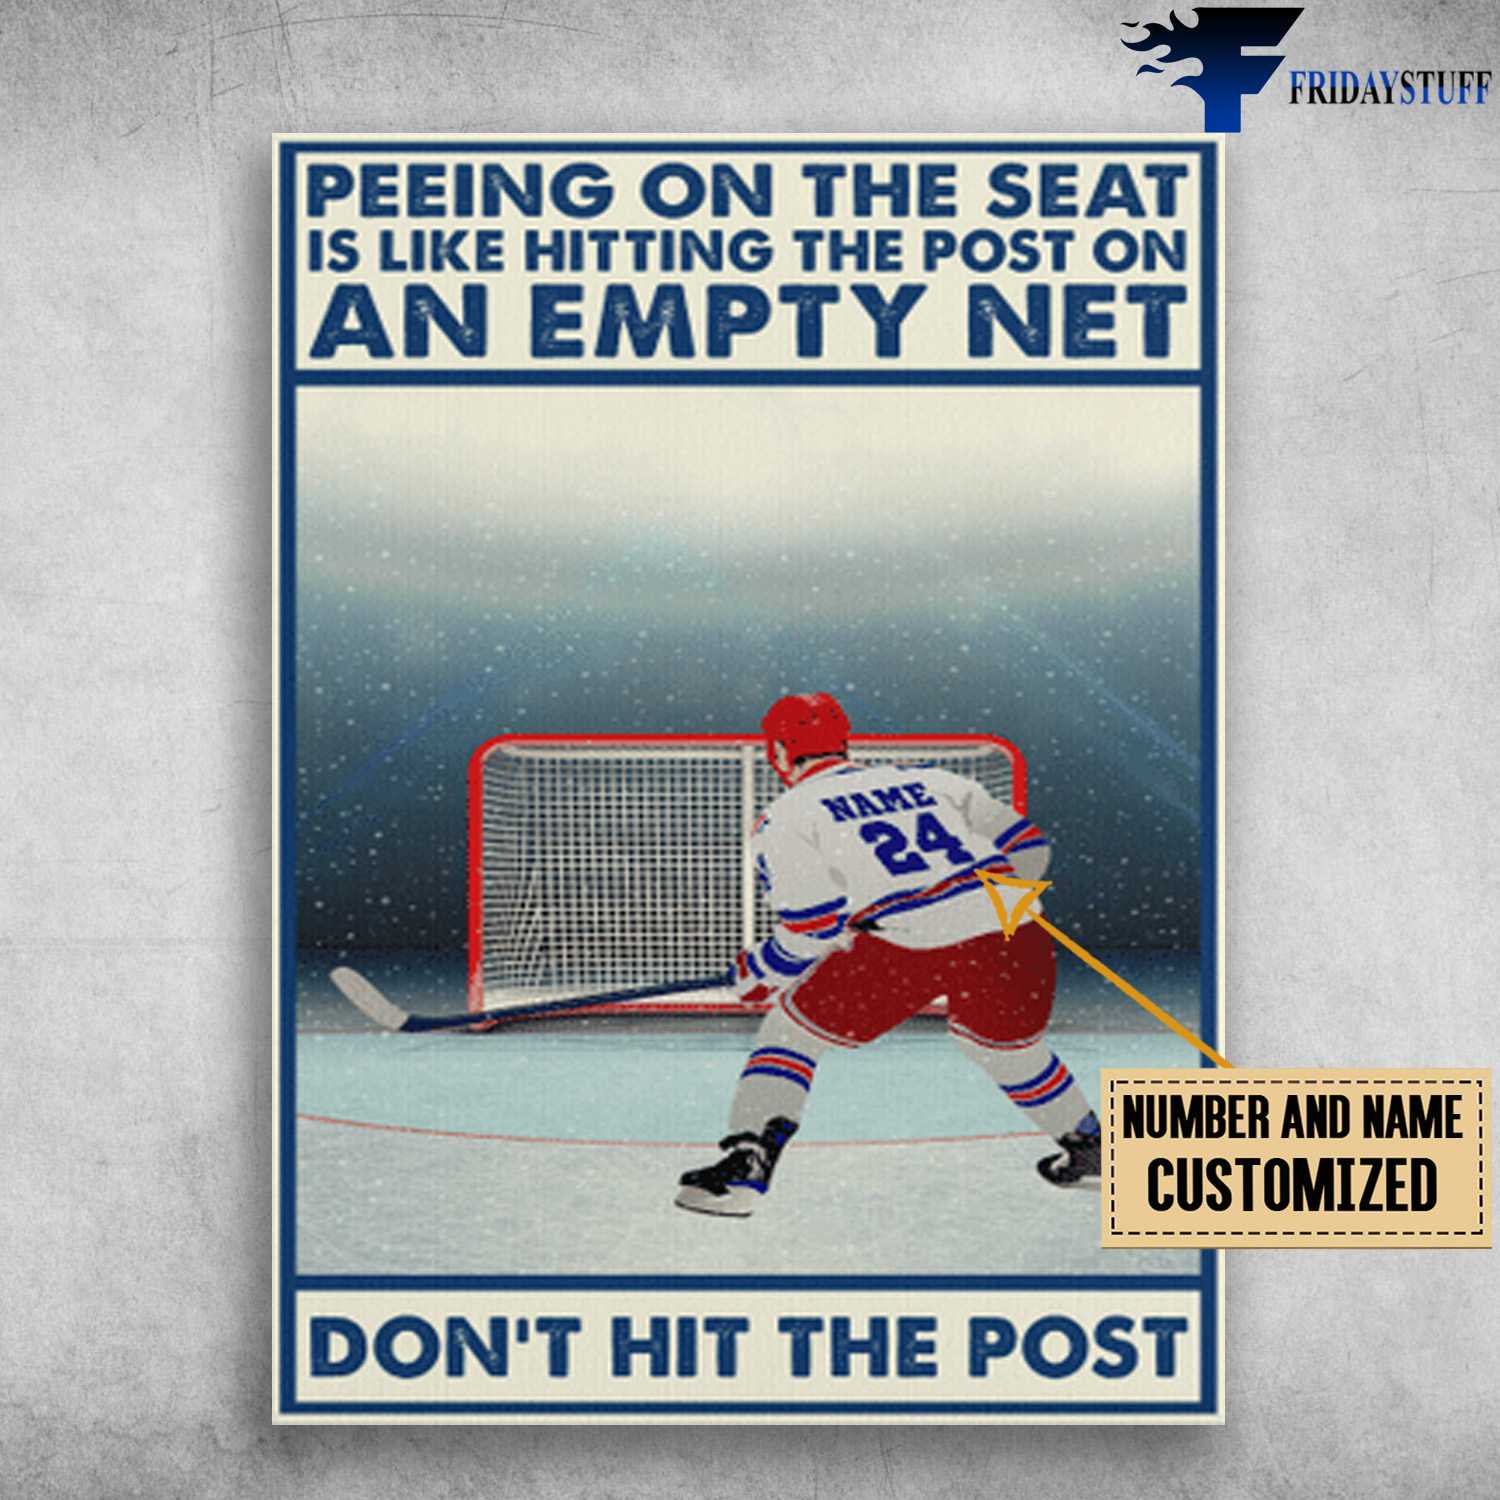 Ice Hockey Player, Peeing On The Seat, Is Like Hitting The Post, On An Empty Net, Don't Hit The Post